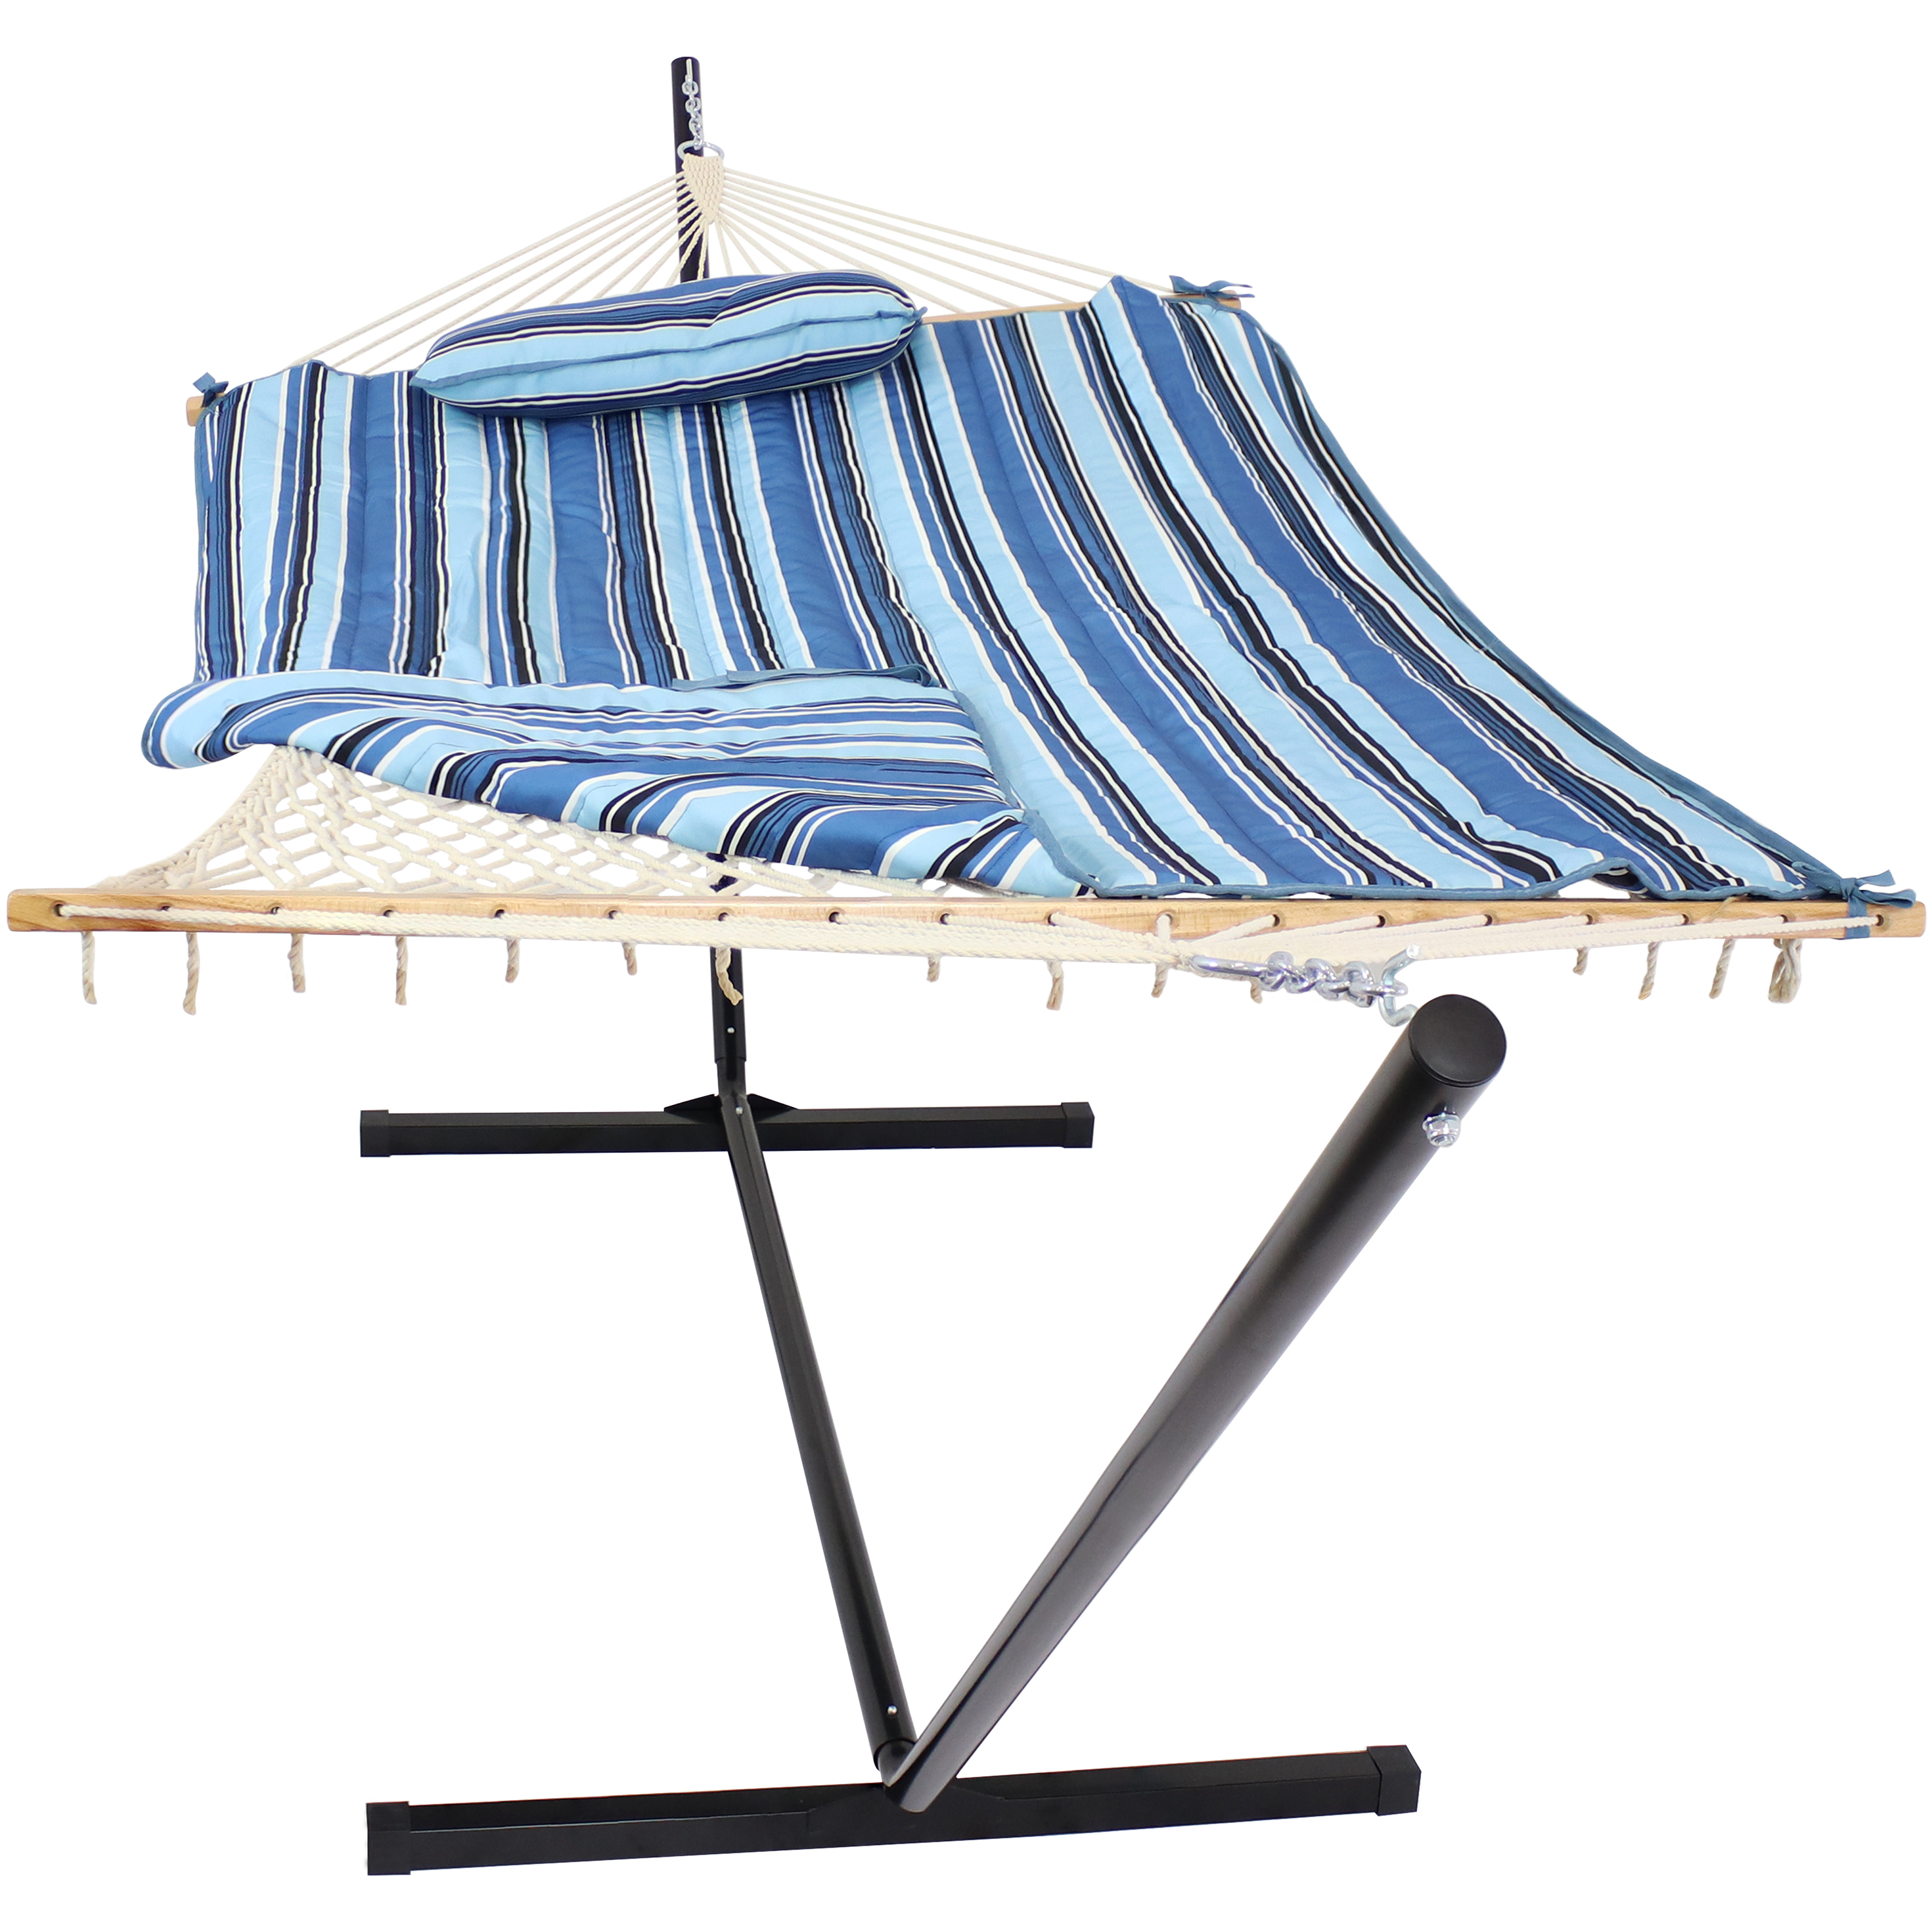 Sunnydaze Rope Hammock, 12-Foot Stand, and Pad and Pillow Set - Misty Beach